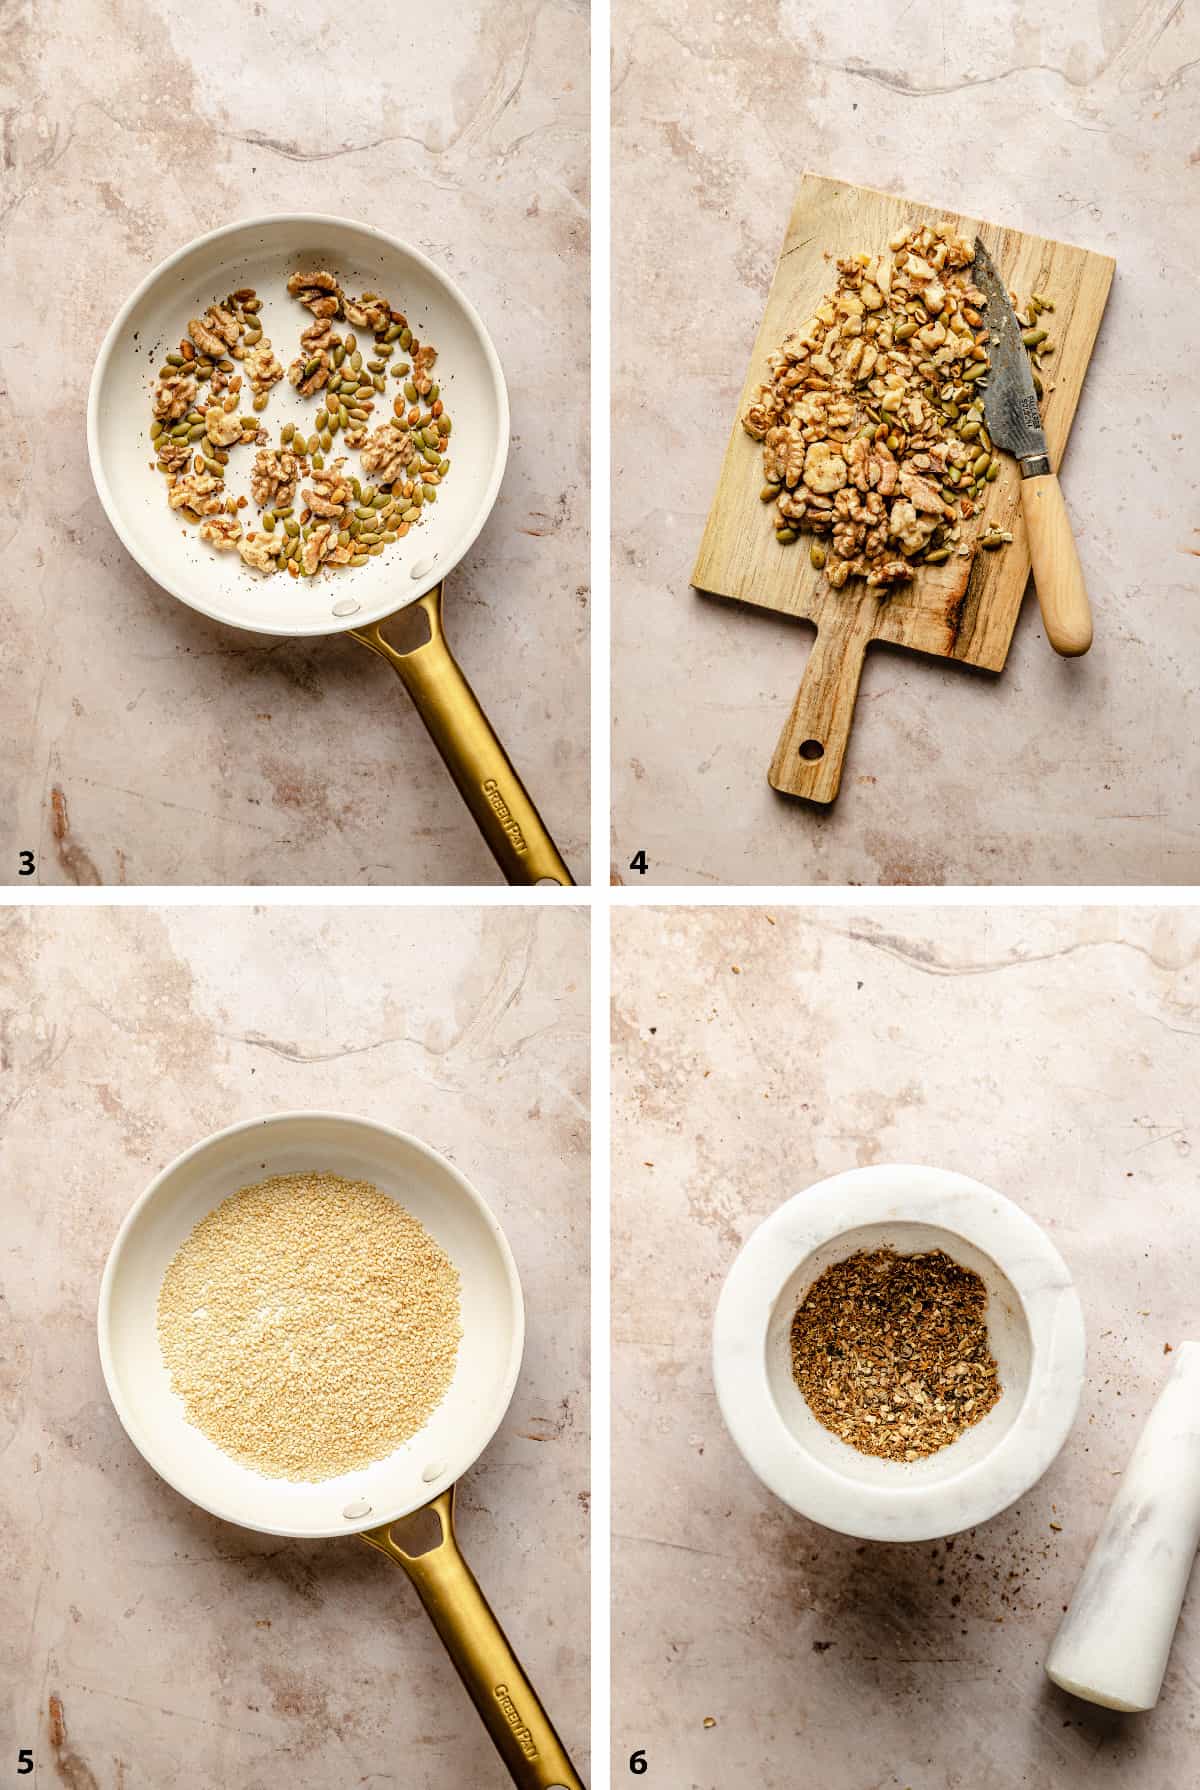 Process steps of toasting seeds and nuts and spices for dukkah.